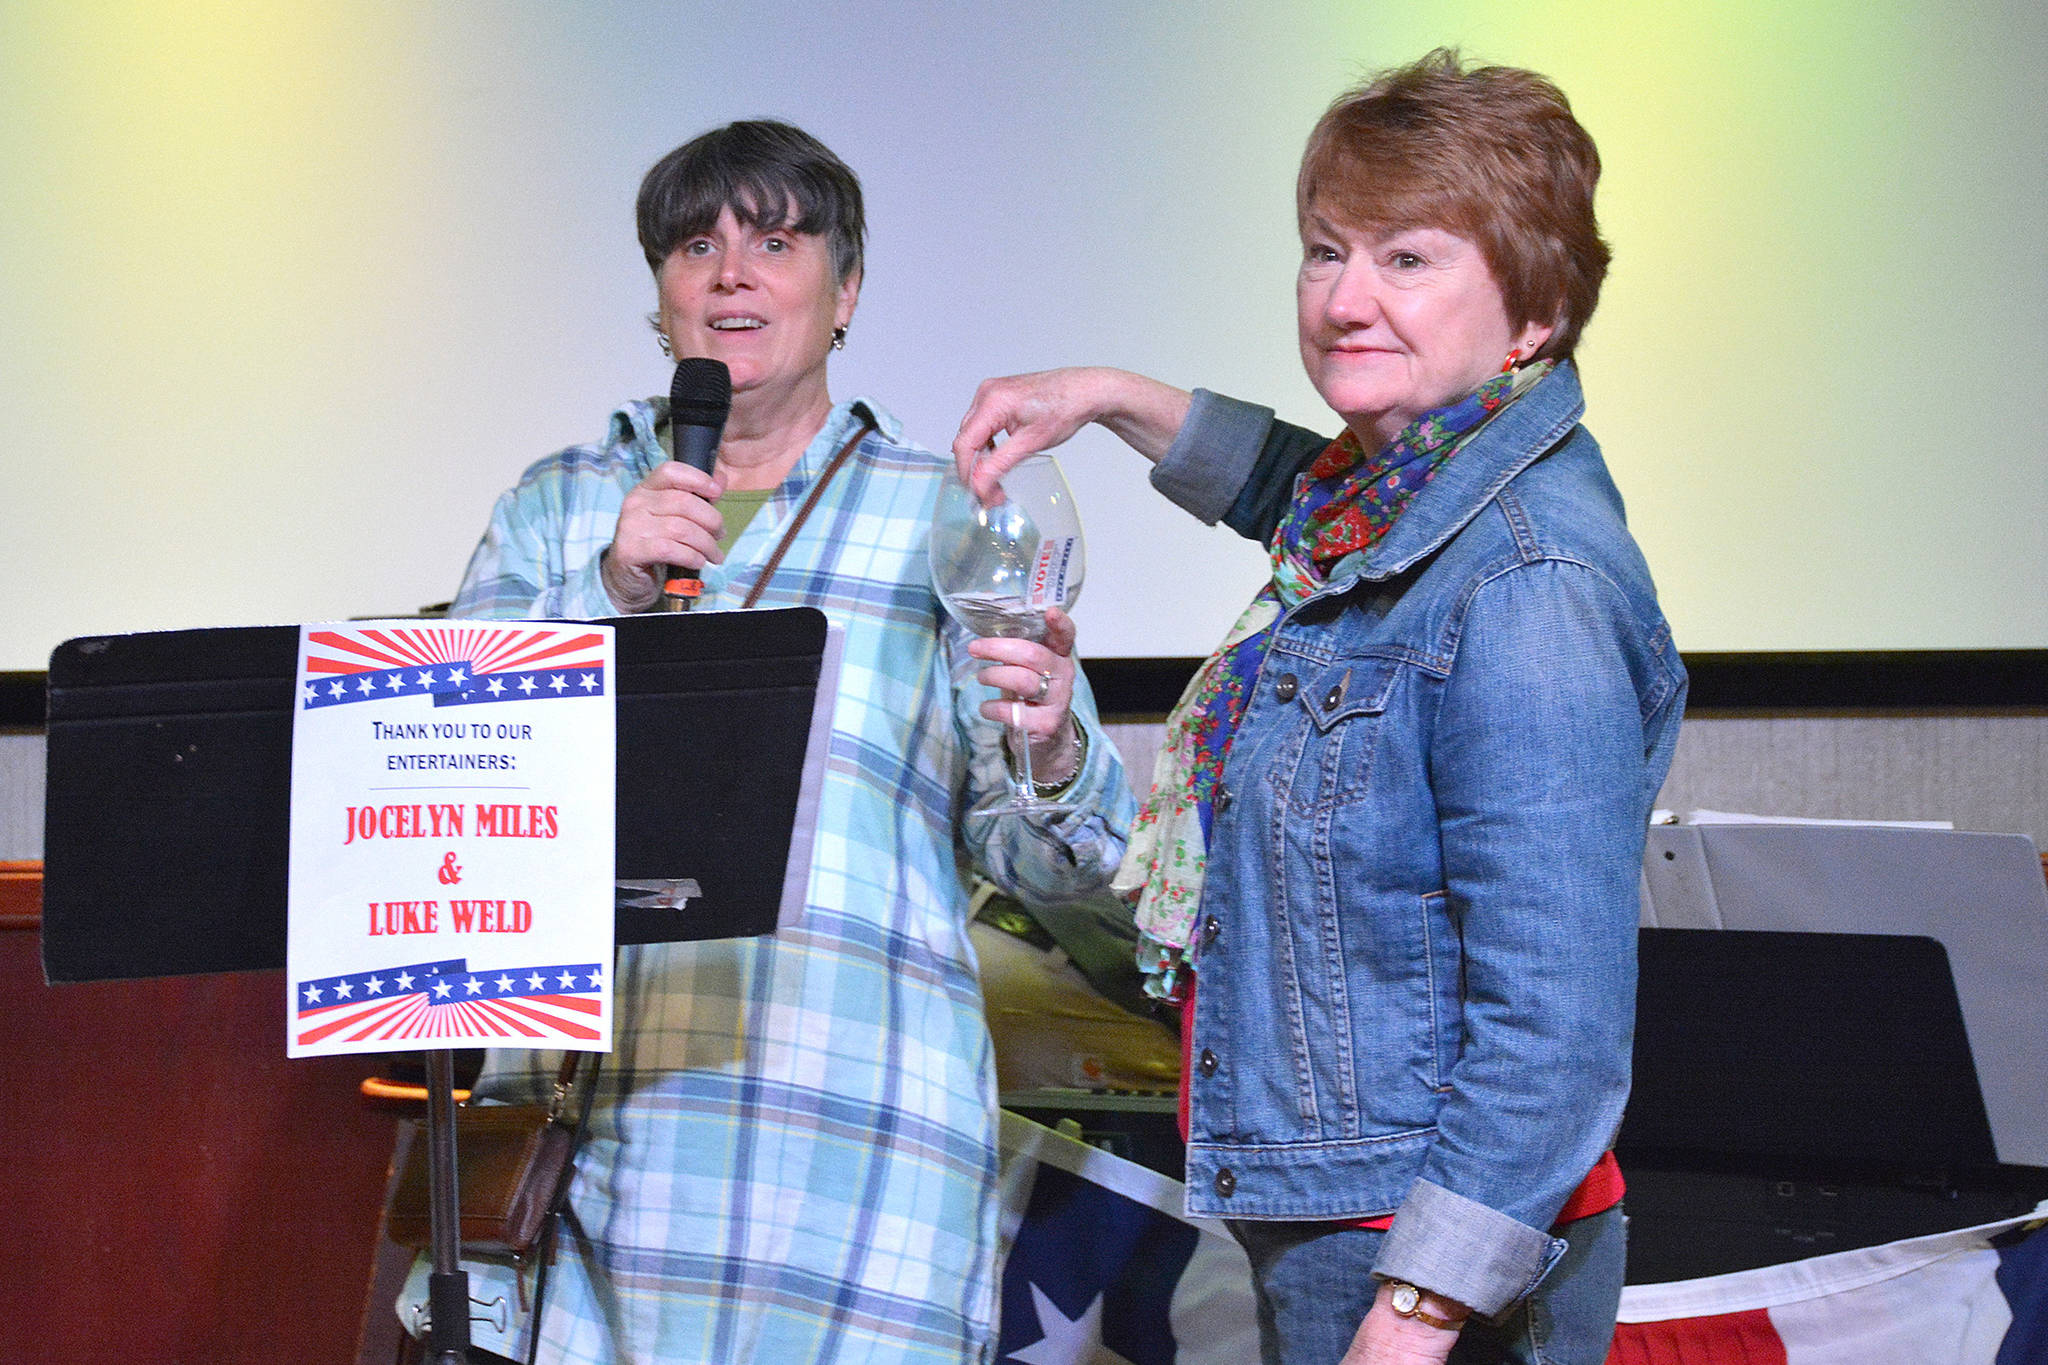 League of Women Voters of Juneau Director Judith Mitchell and Vice President Marianne Mills draw a door prize during the League’s fourth annual Wine Tasting and Silent Auction Fundraiser on Oct. 5, 2018, at the Hangar Ballroom. (Courtesy Photo | Kim Andree Jones)